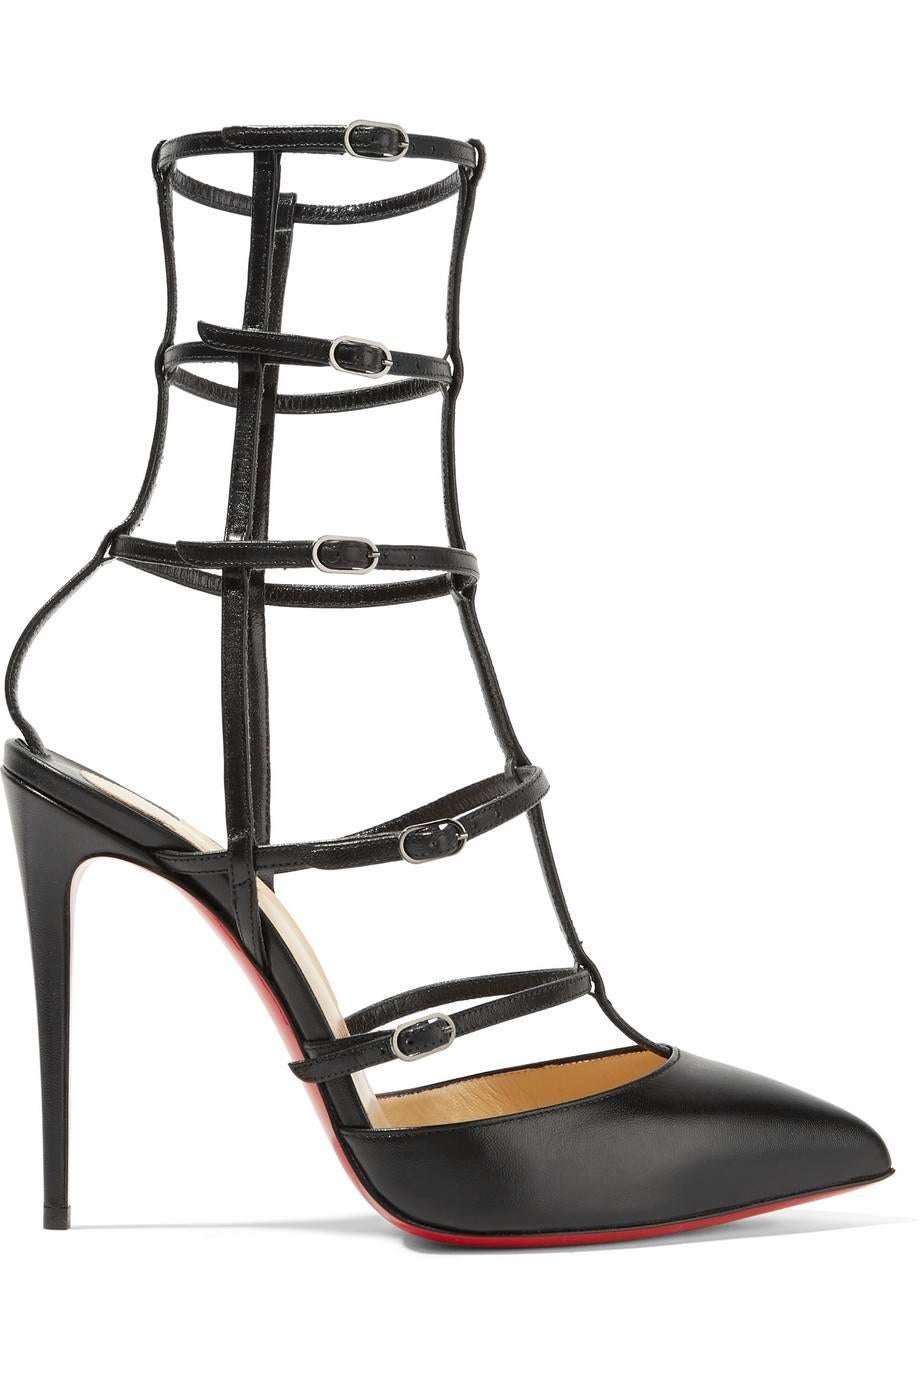 Women's Christian Louboutin Black Leather Cage Evening Sandals Heels Pumps in Box